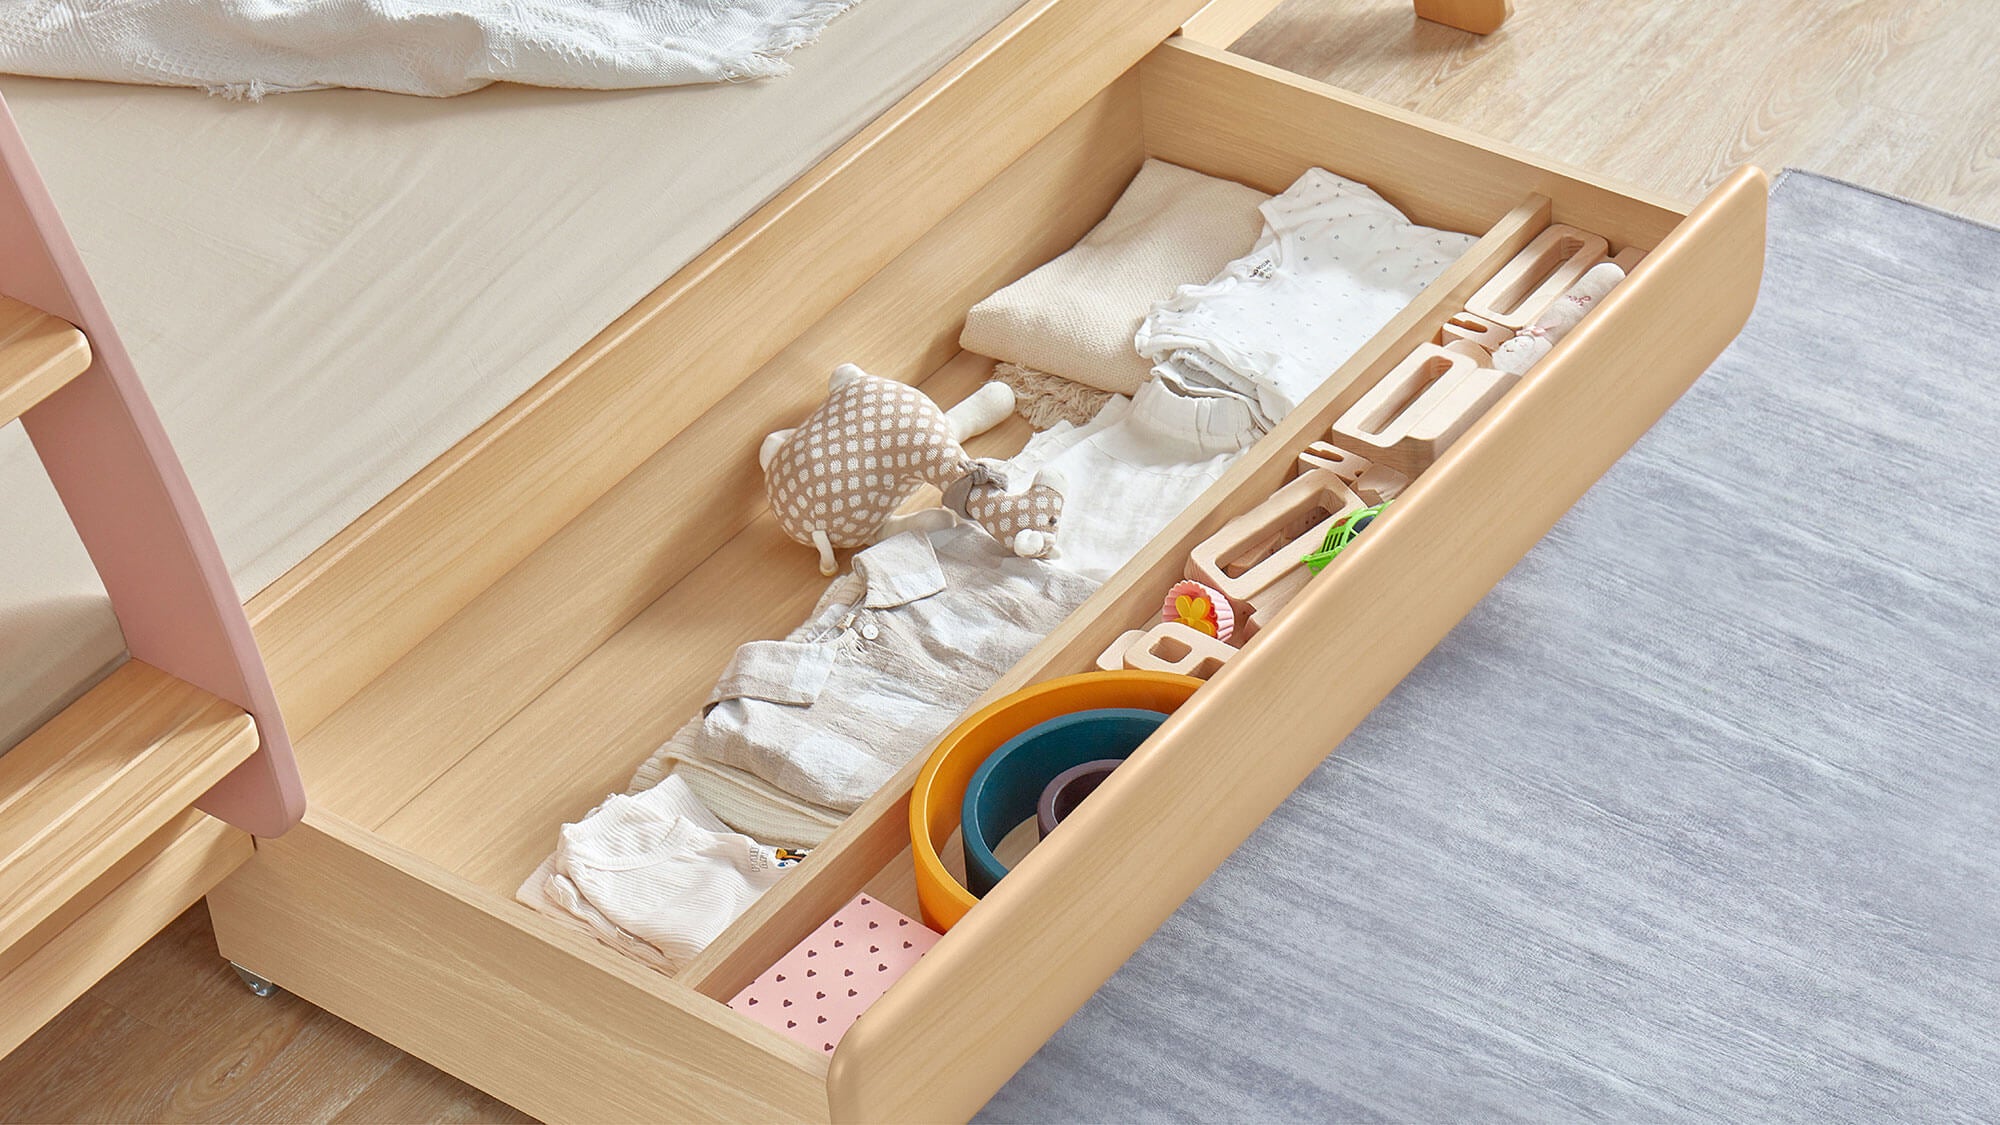 Avalon under-bed drawer with clothing and toys inside